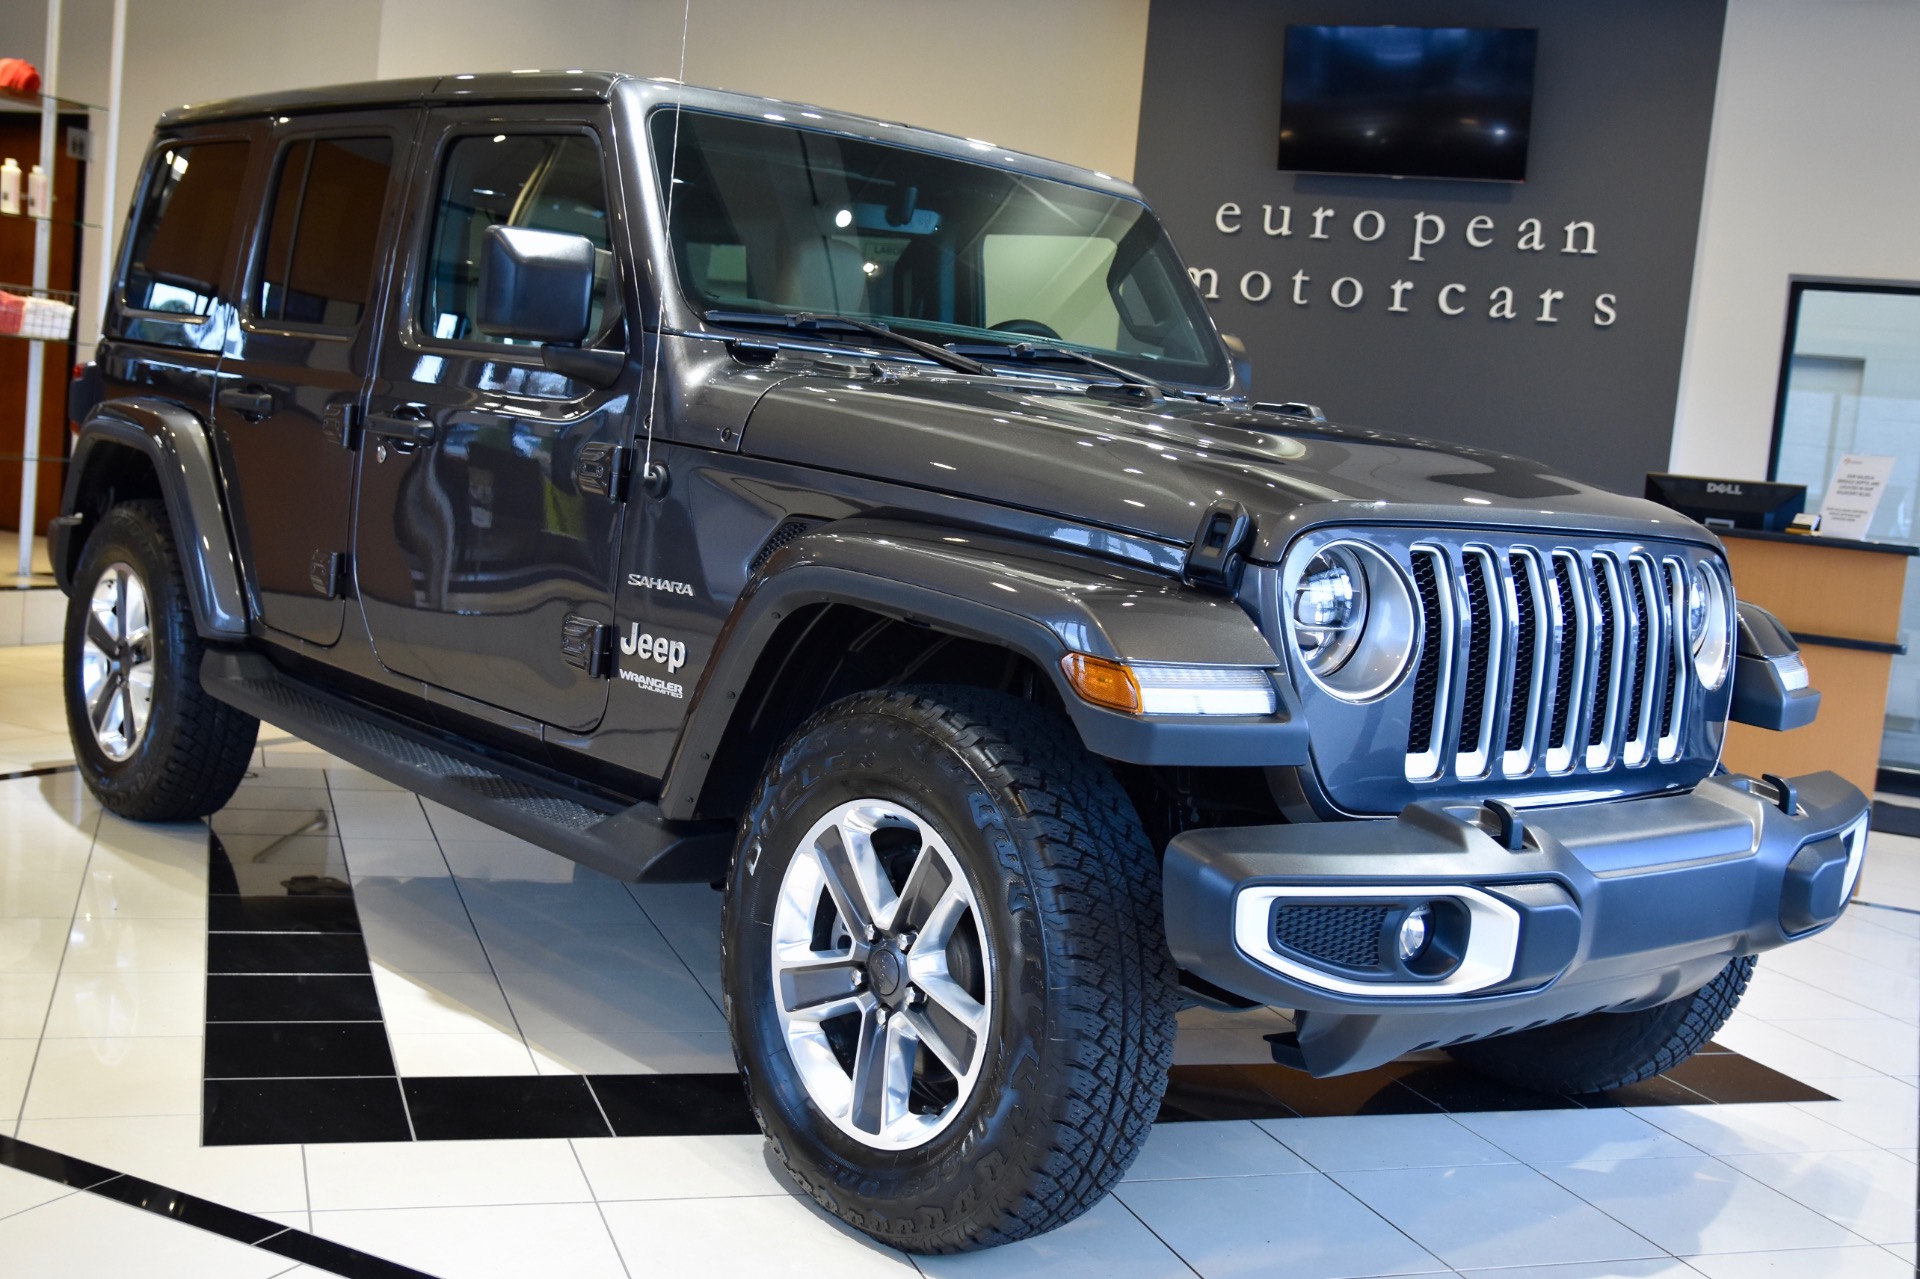 Used 2018 Jeep Wrangler Unlimited ALL-NEW JL Sahara For Sale (Sold) |  European Motorcars Stock #238451